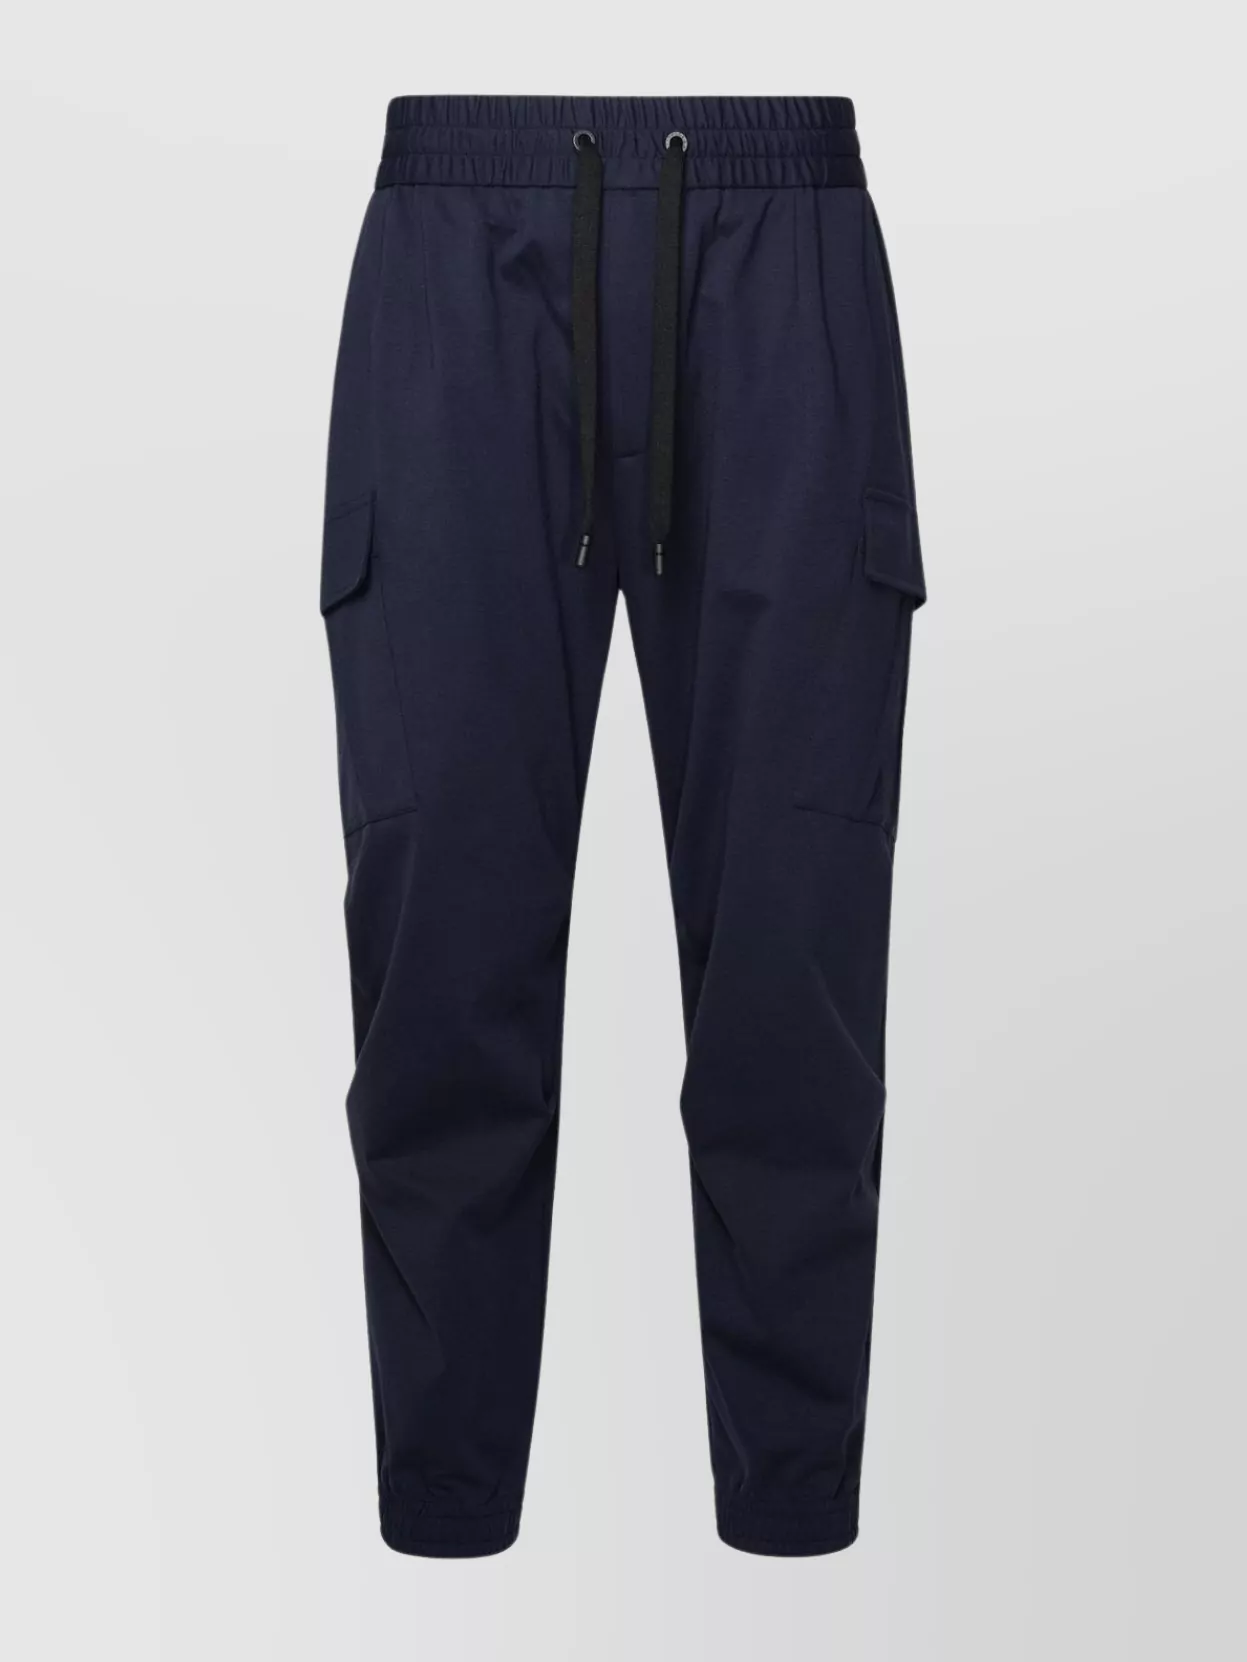 Dolce & Gabbana Cotton Blend Trousers Cargo Pockets In Blue